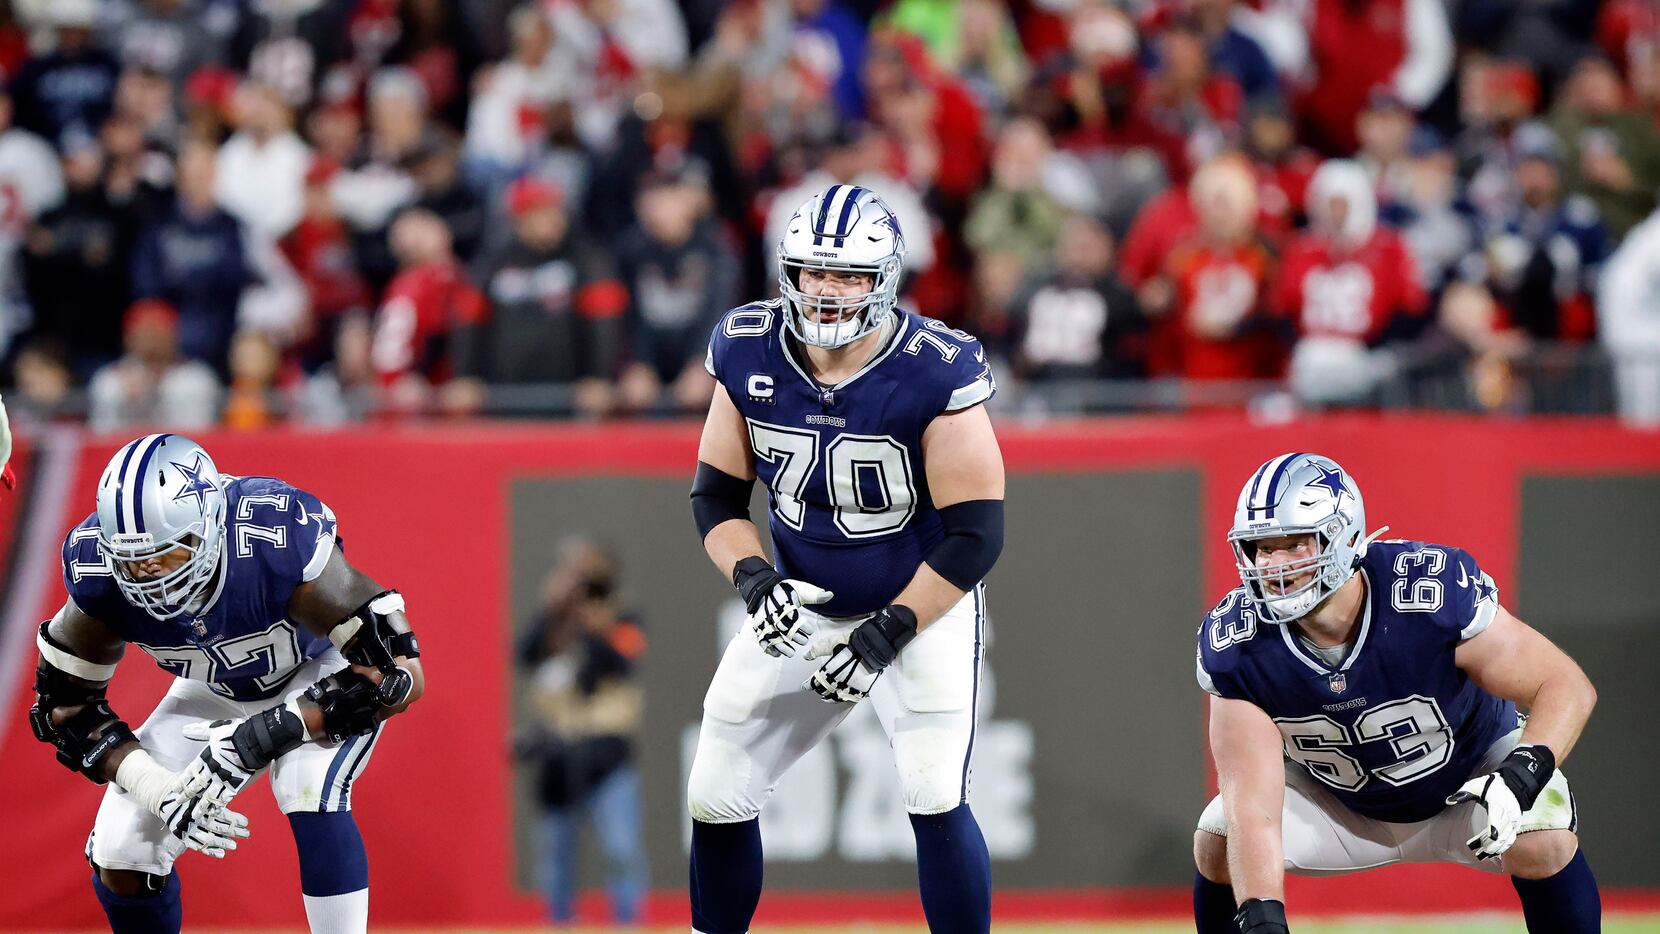 NFL Network's Brian Baldinger breaks down Cowboys OL issues, overall draft  class